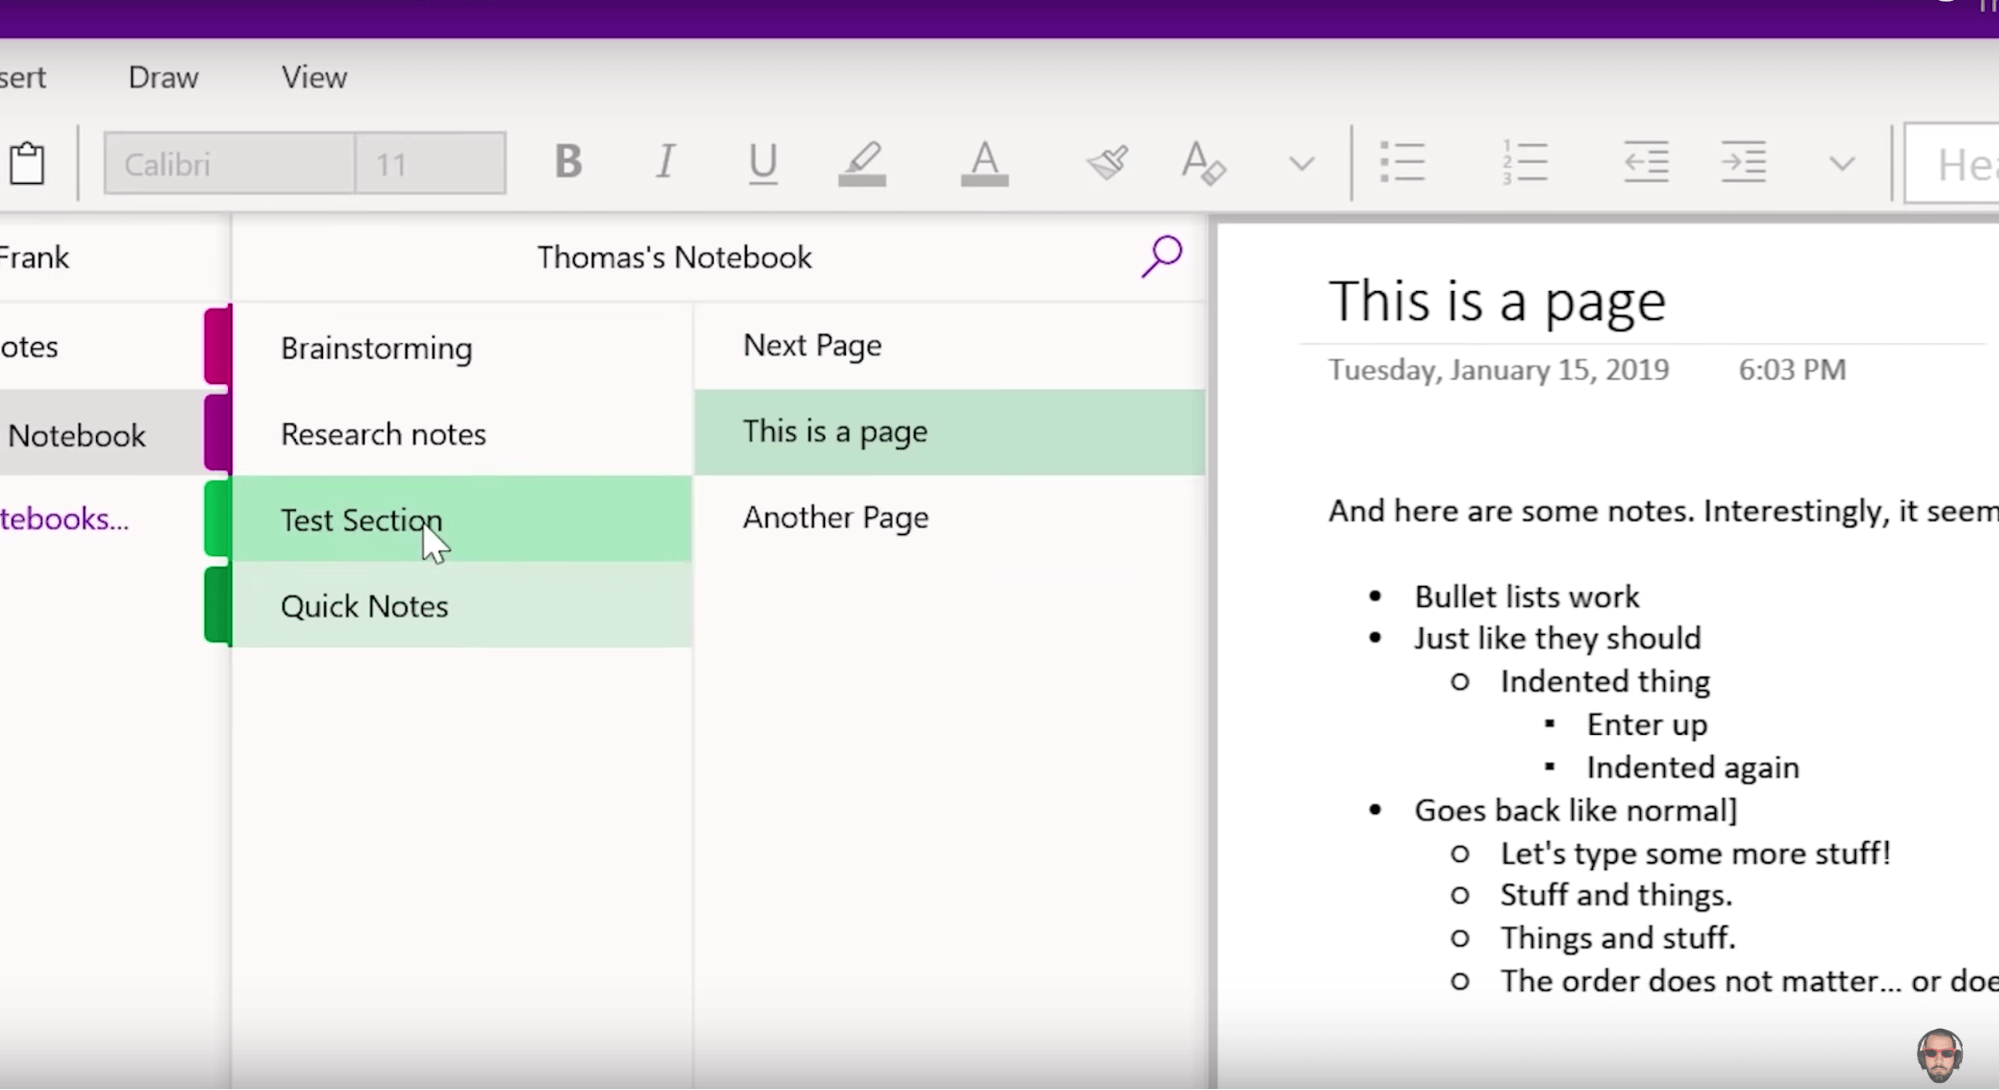 Ensure no other note-taking apps are running simultaneously
Close any parallel note-taking applications